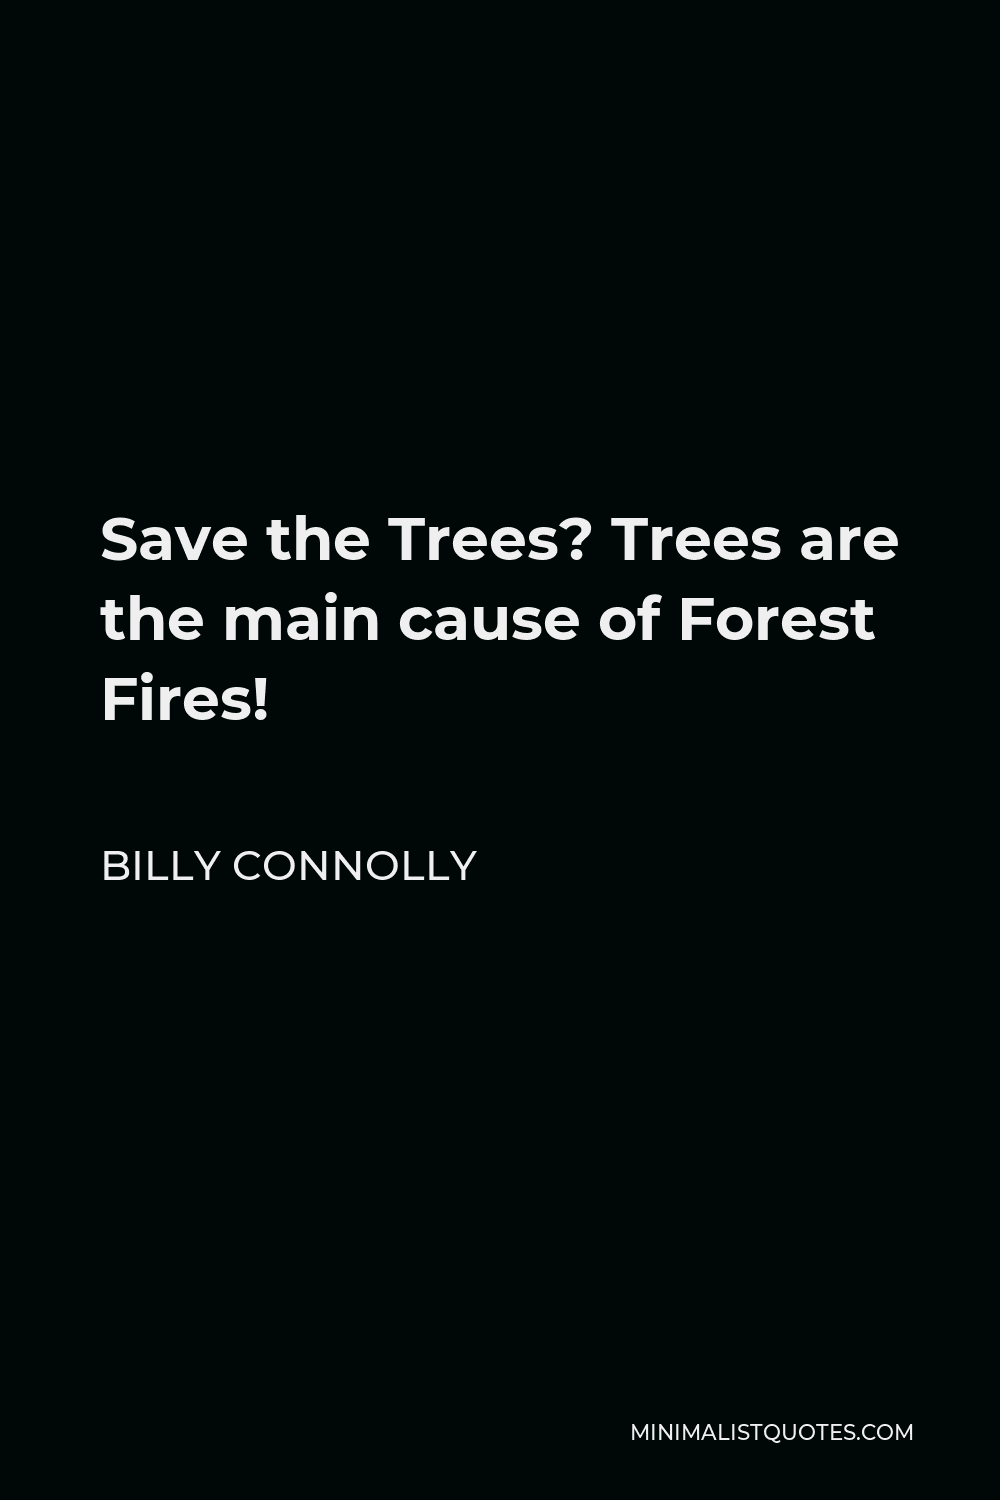 Billy Connolly Quote - Save the Trees? Trees are the main cause of Forest Fires!